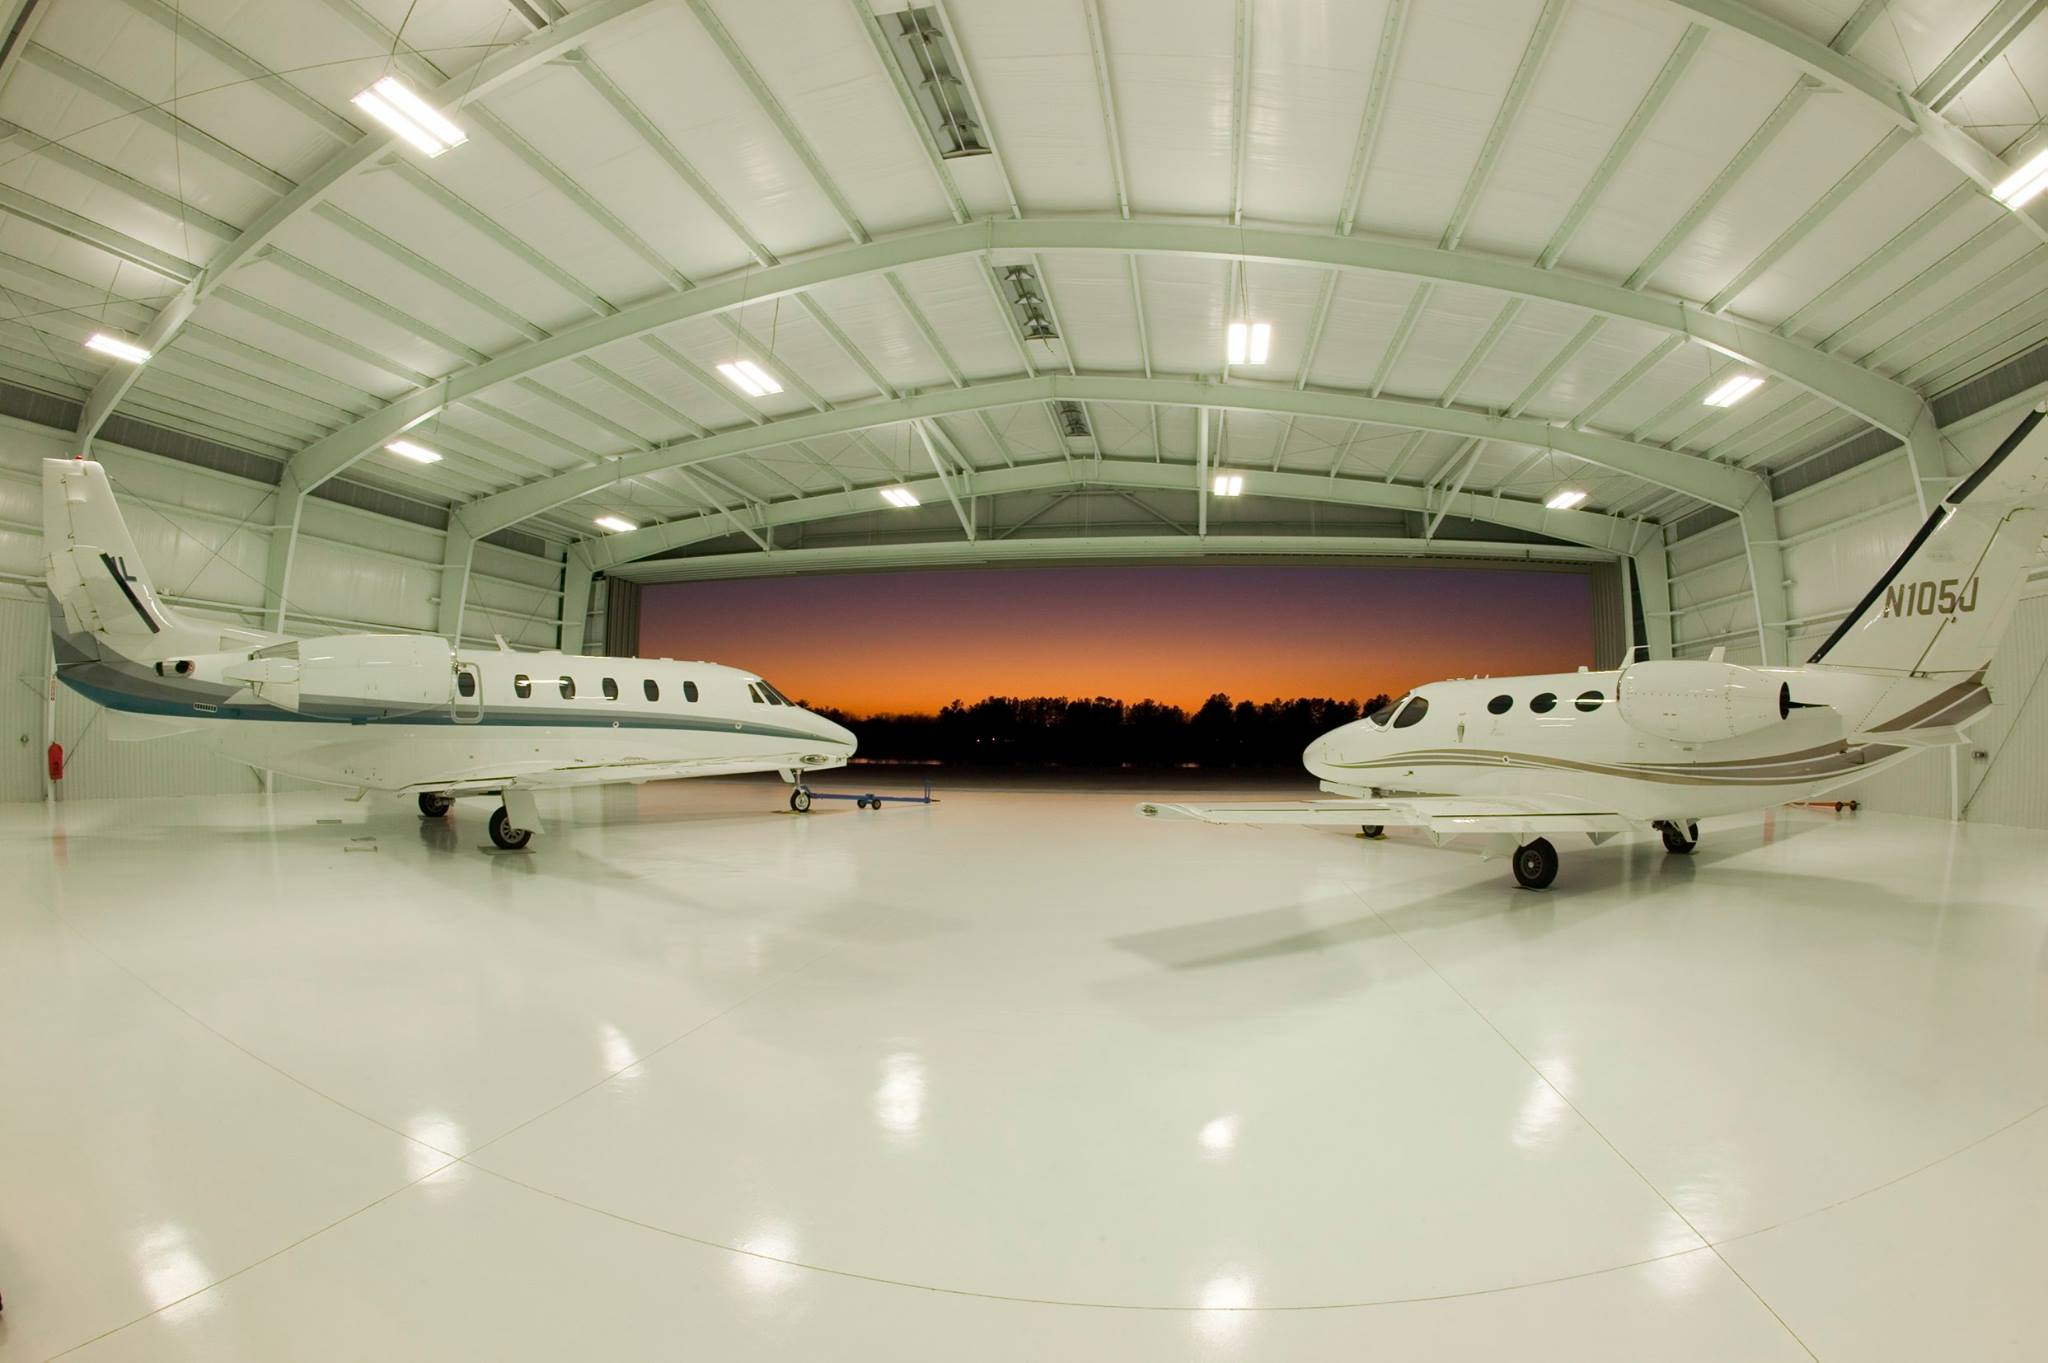 Steel Airplane Hangar with two planes